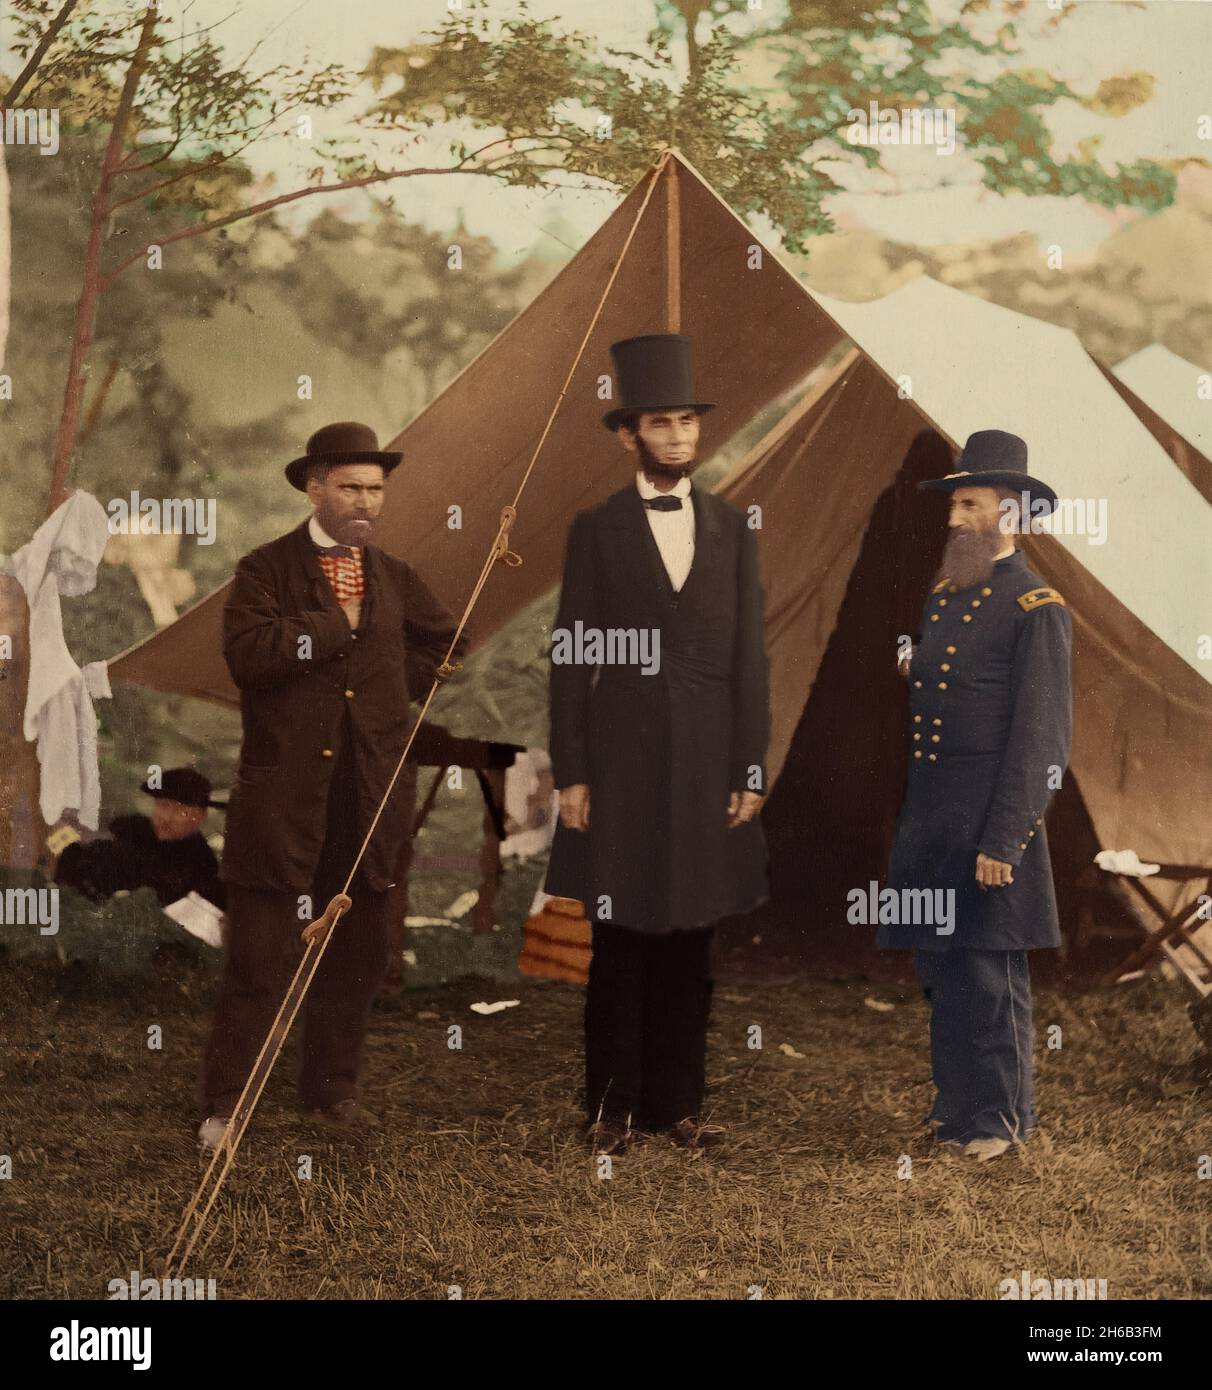 [President Abraham Lincoln, Major General John A. McClernand (right), and E. J. Allen (Allan Pinkerton, left), Chief of the Secret Service of the United States, at Secret Service Department, Headquarters Army of the Potomac, near Antietam, Maryland], October 3, 1862. (Colorised black and white print). Stock Photo